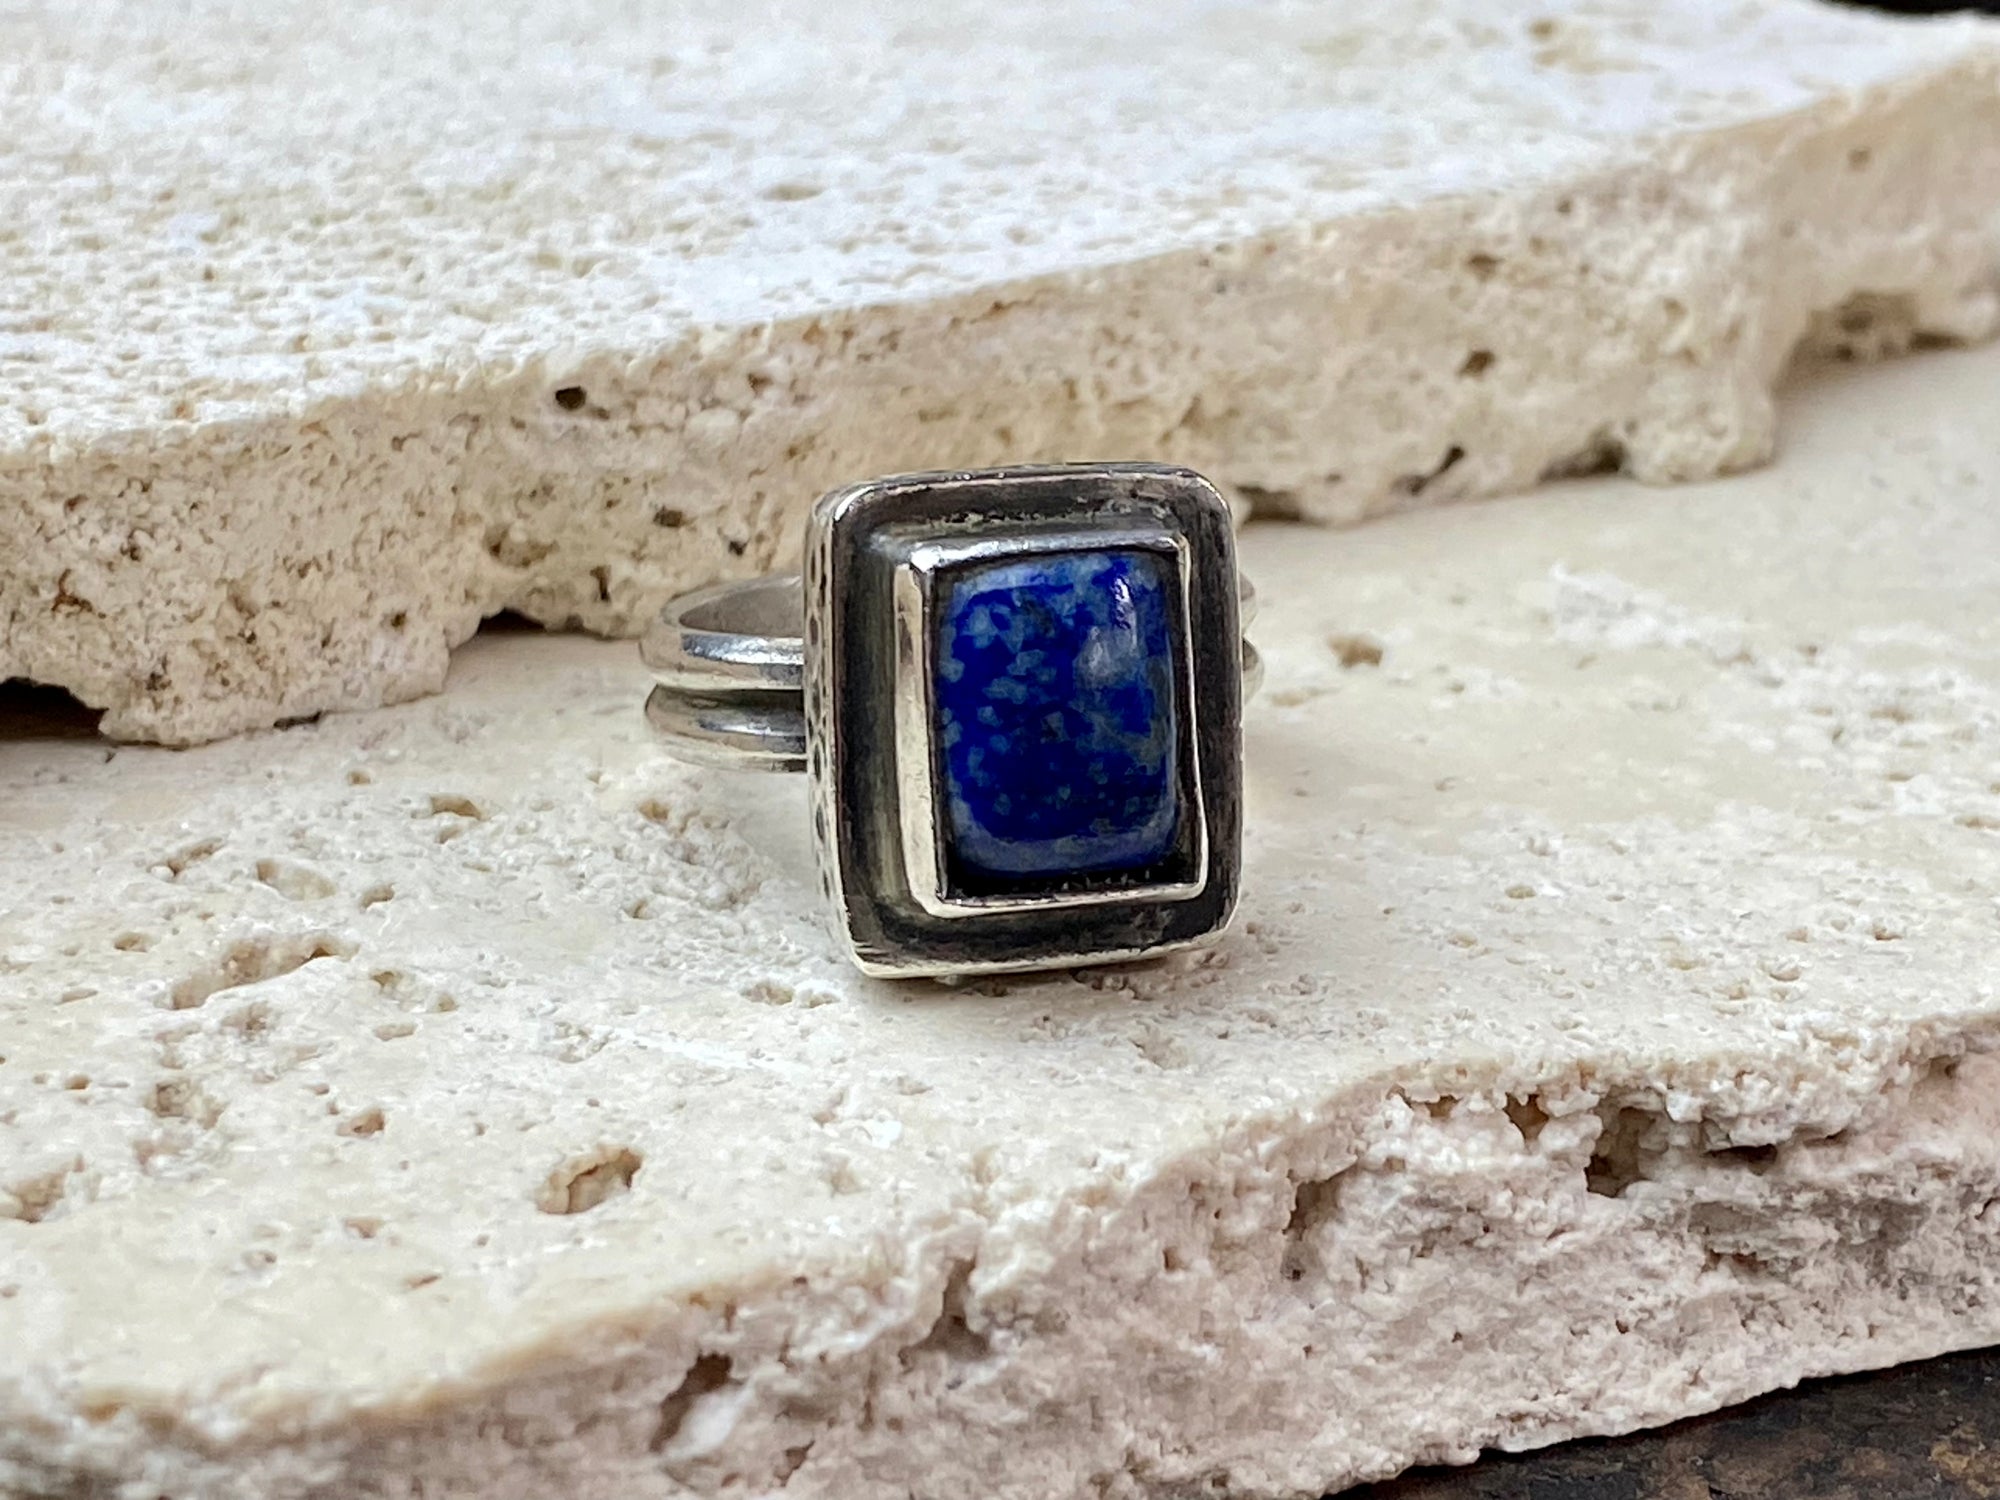 This beautiful vintage ring features a lapis lazuli stone. This ring sits high on the finger and is a definite statement piece. High grade silver. From Afghanistan, mid 20th century. Adjustable. Measurements: Ring face 1.6 x 1.3 cm, diameter 18.5 mm | Size 8.5 | No 19, to fit any finger from 7 - 9